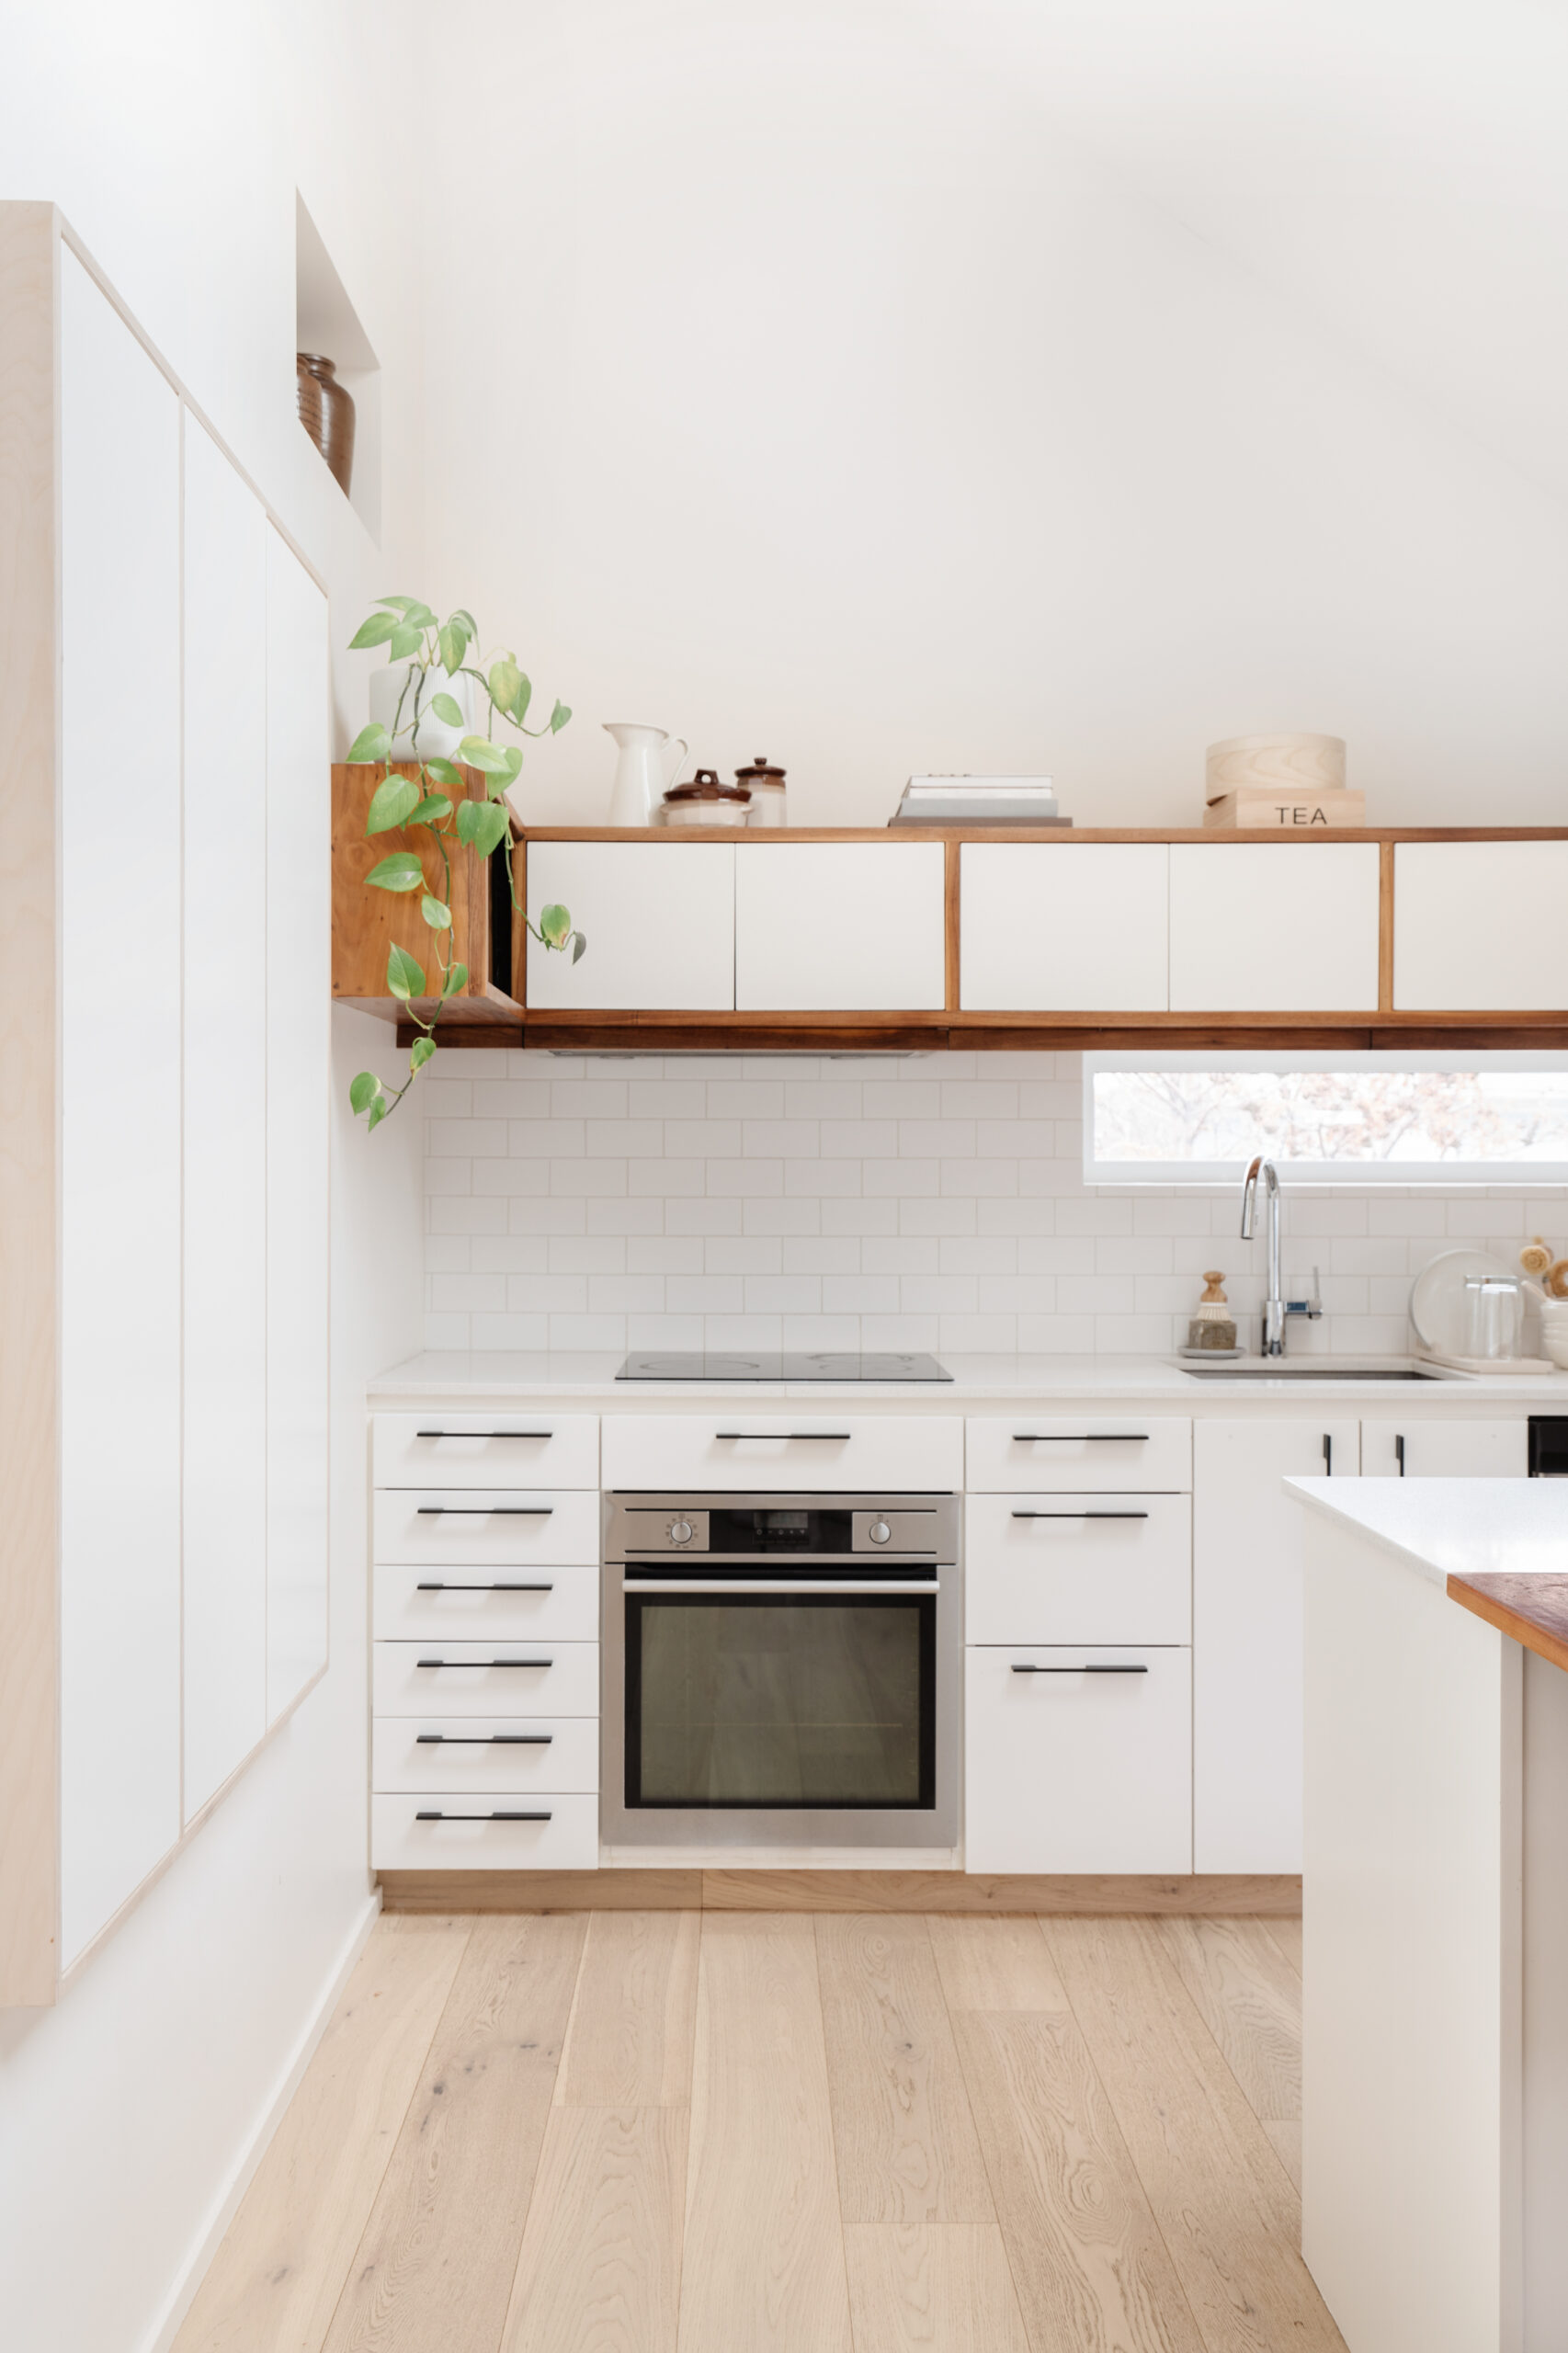 10 Clever Tips on How to Organize Your Kitchen Like a Pro